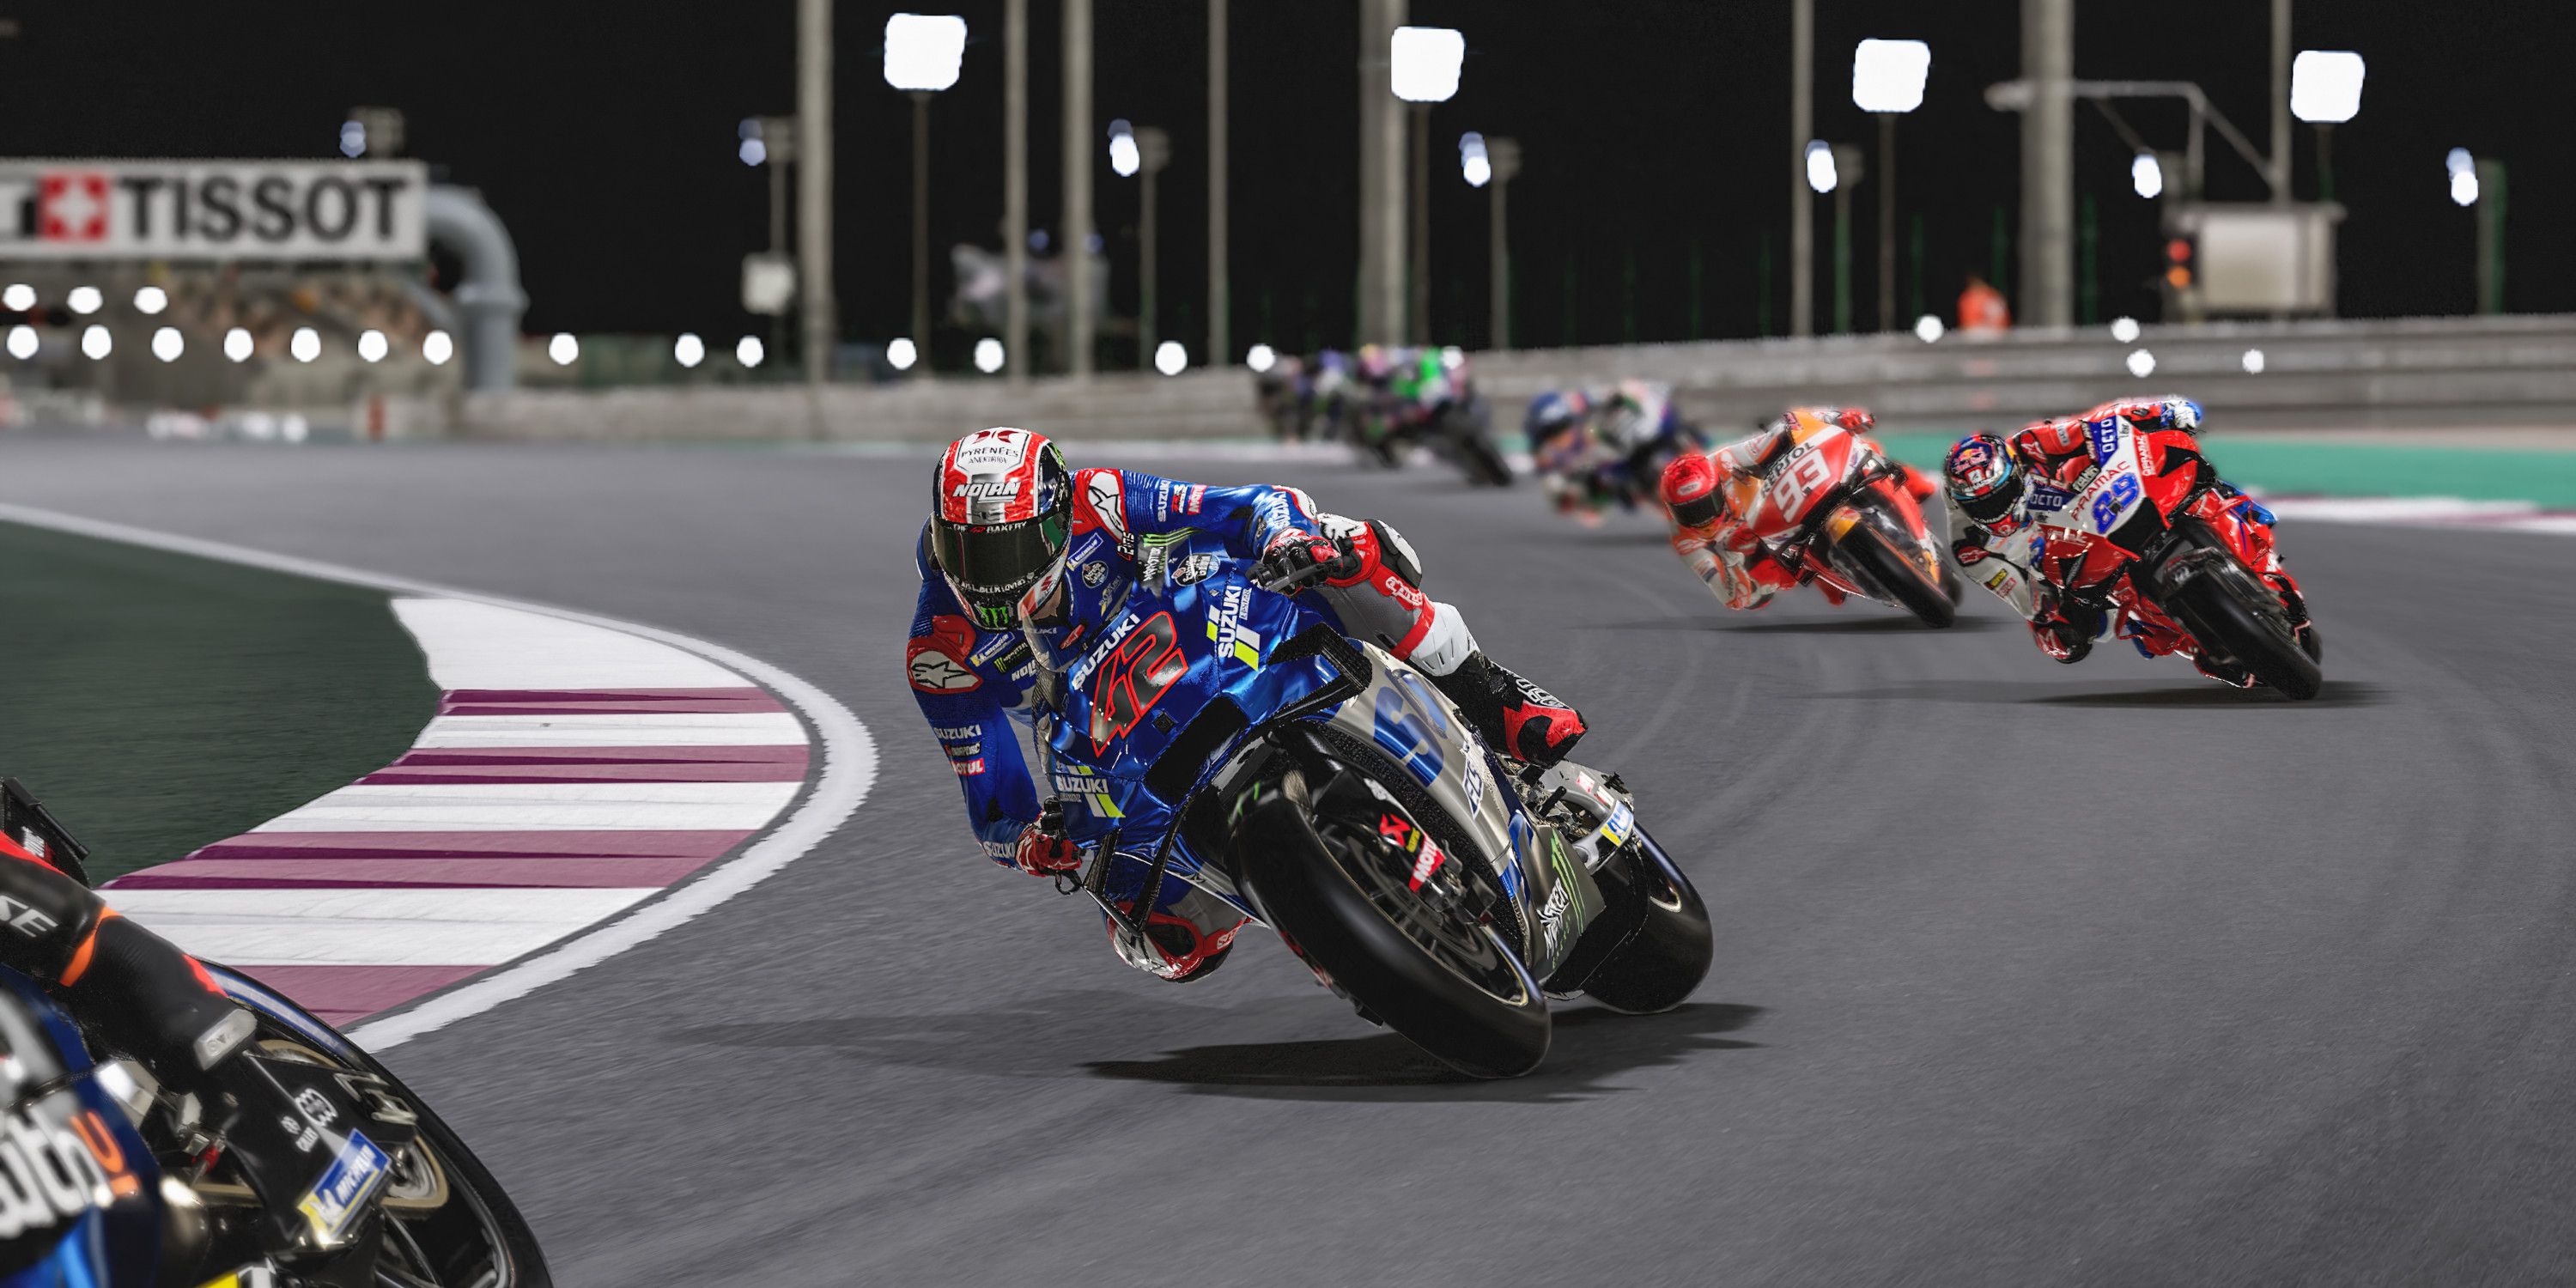 MotoGP 22 review: A sim racer with a steep learning curve - Dexerto